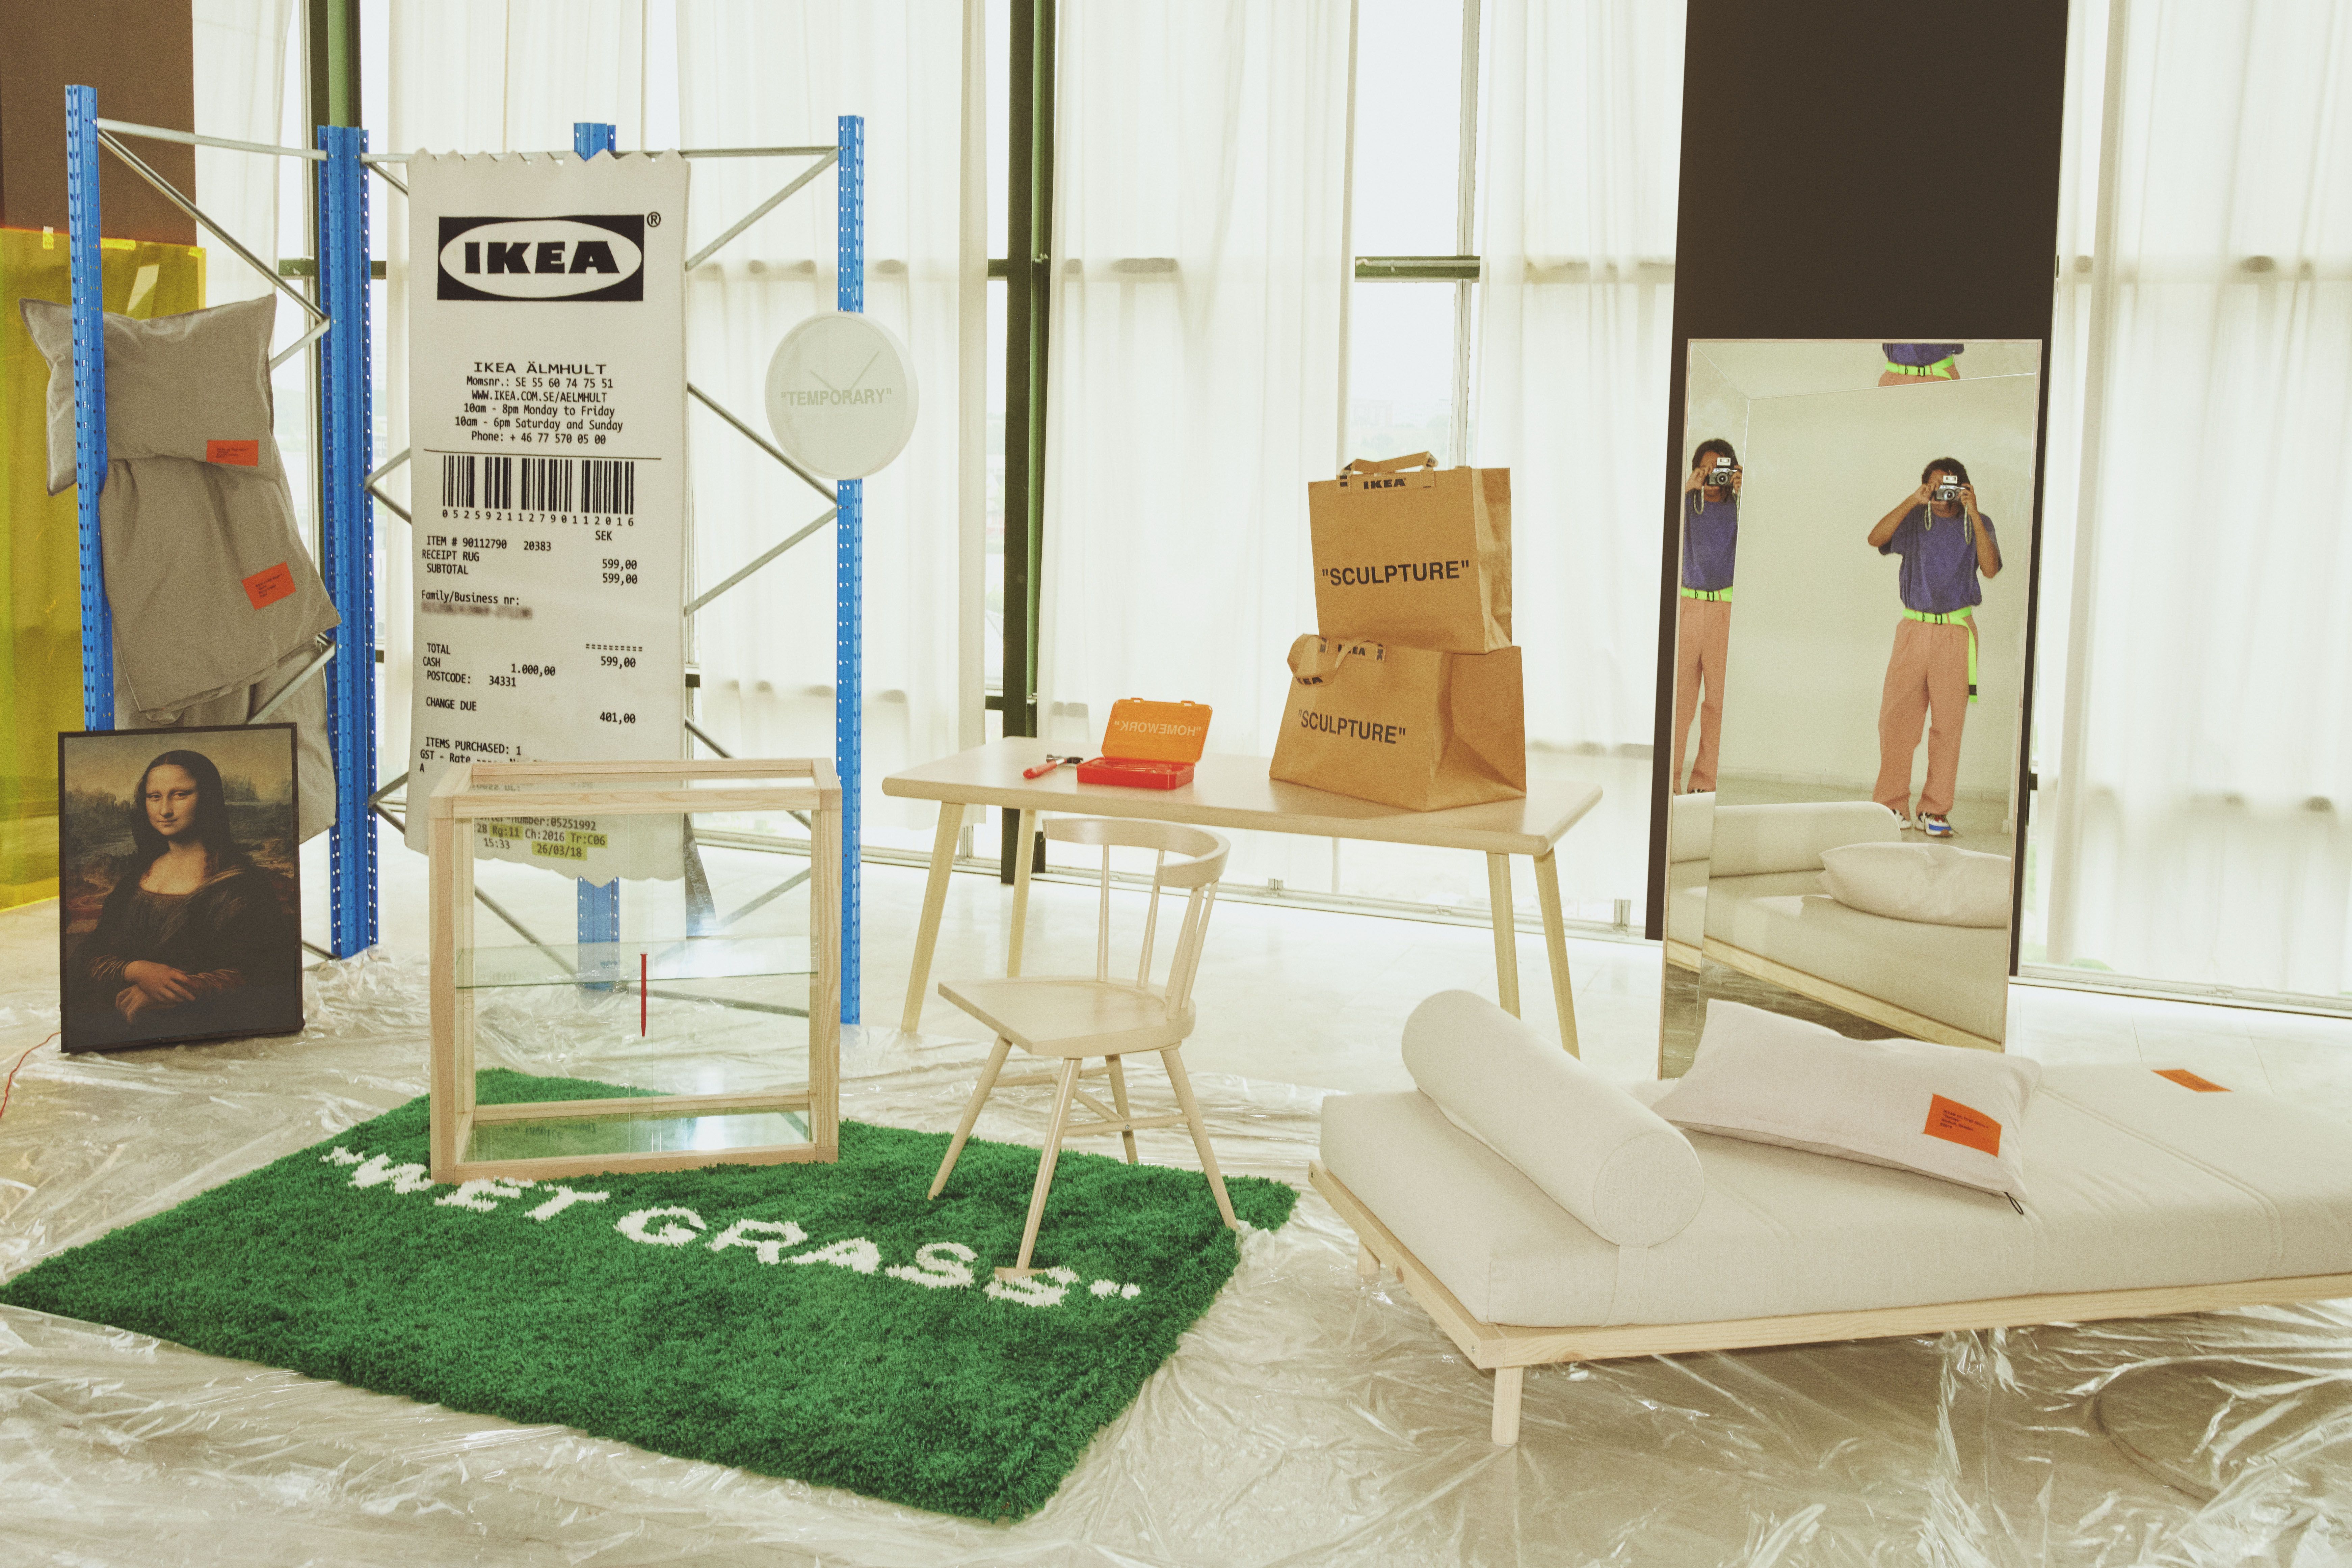 Virgil Abloh launches his limited-edition Ikea collection